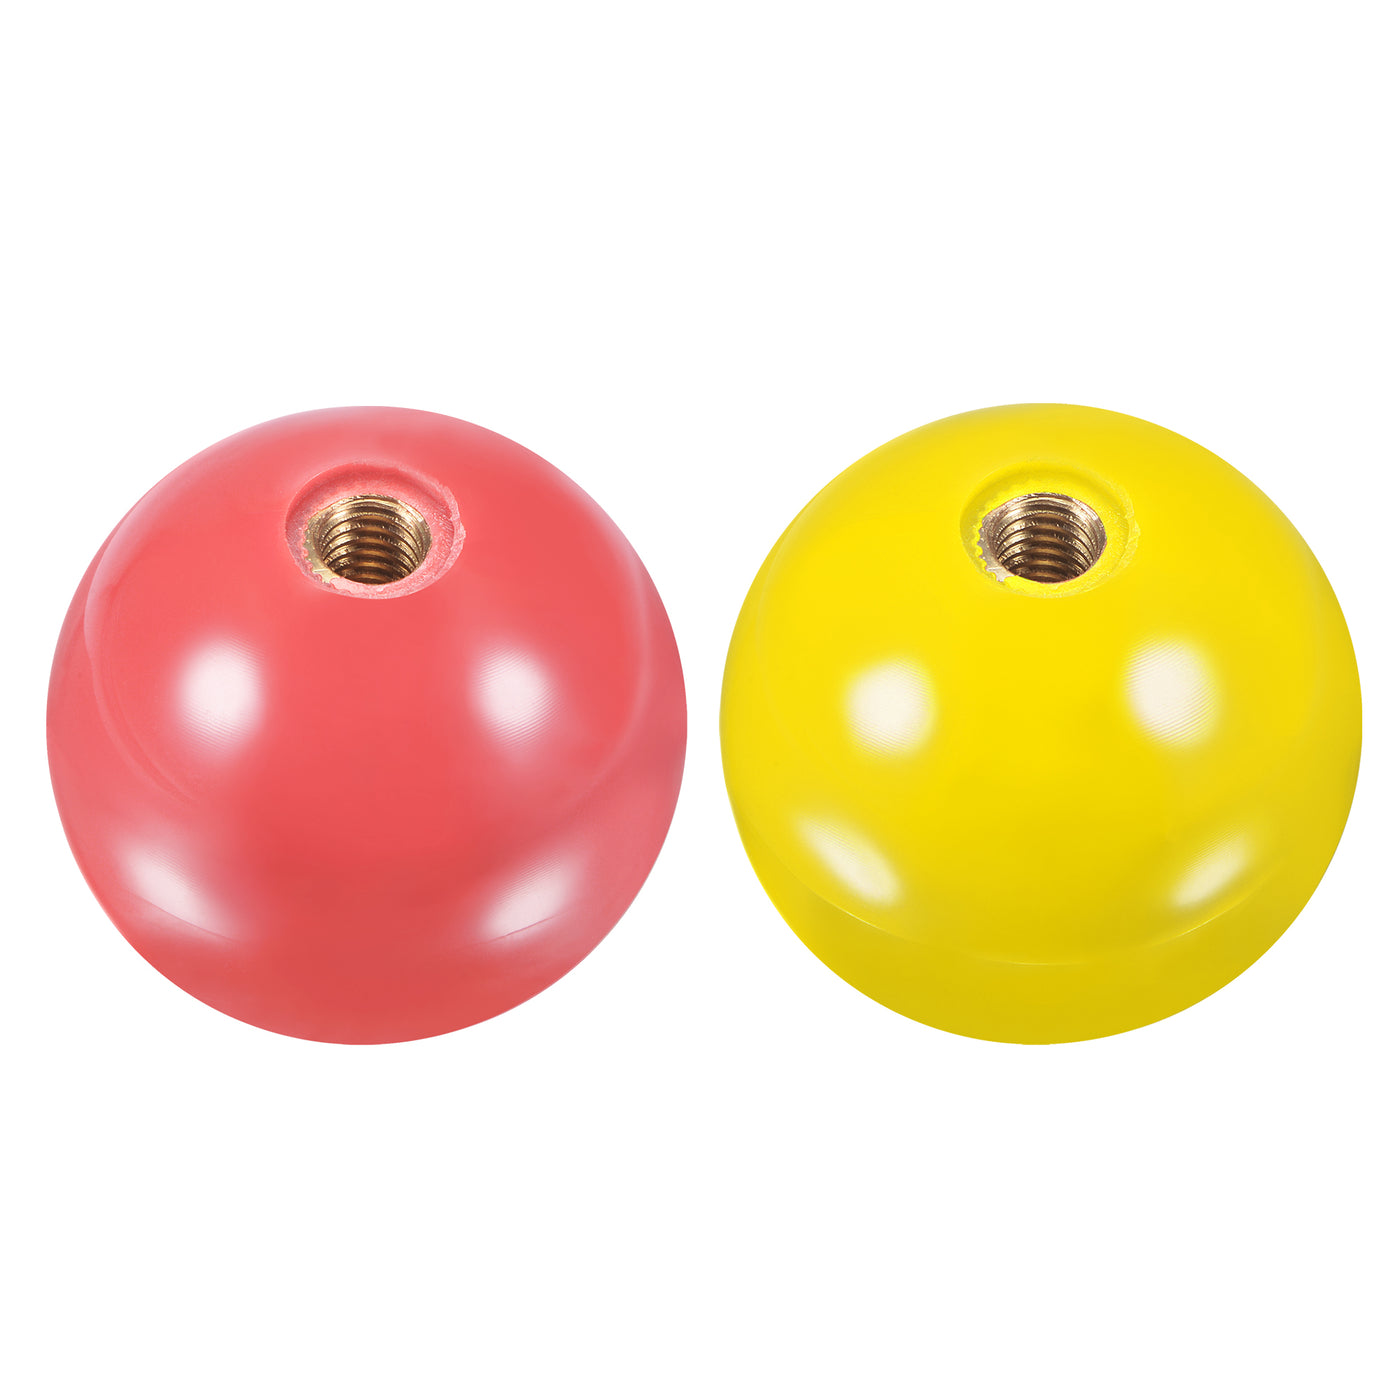 uxcell Uxcell Joystick Head Rocker Ball Top Handle Arcade Game Replacement Pink/Yellow